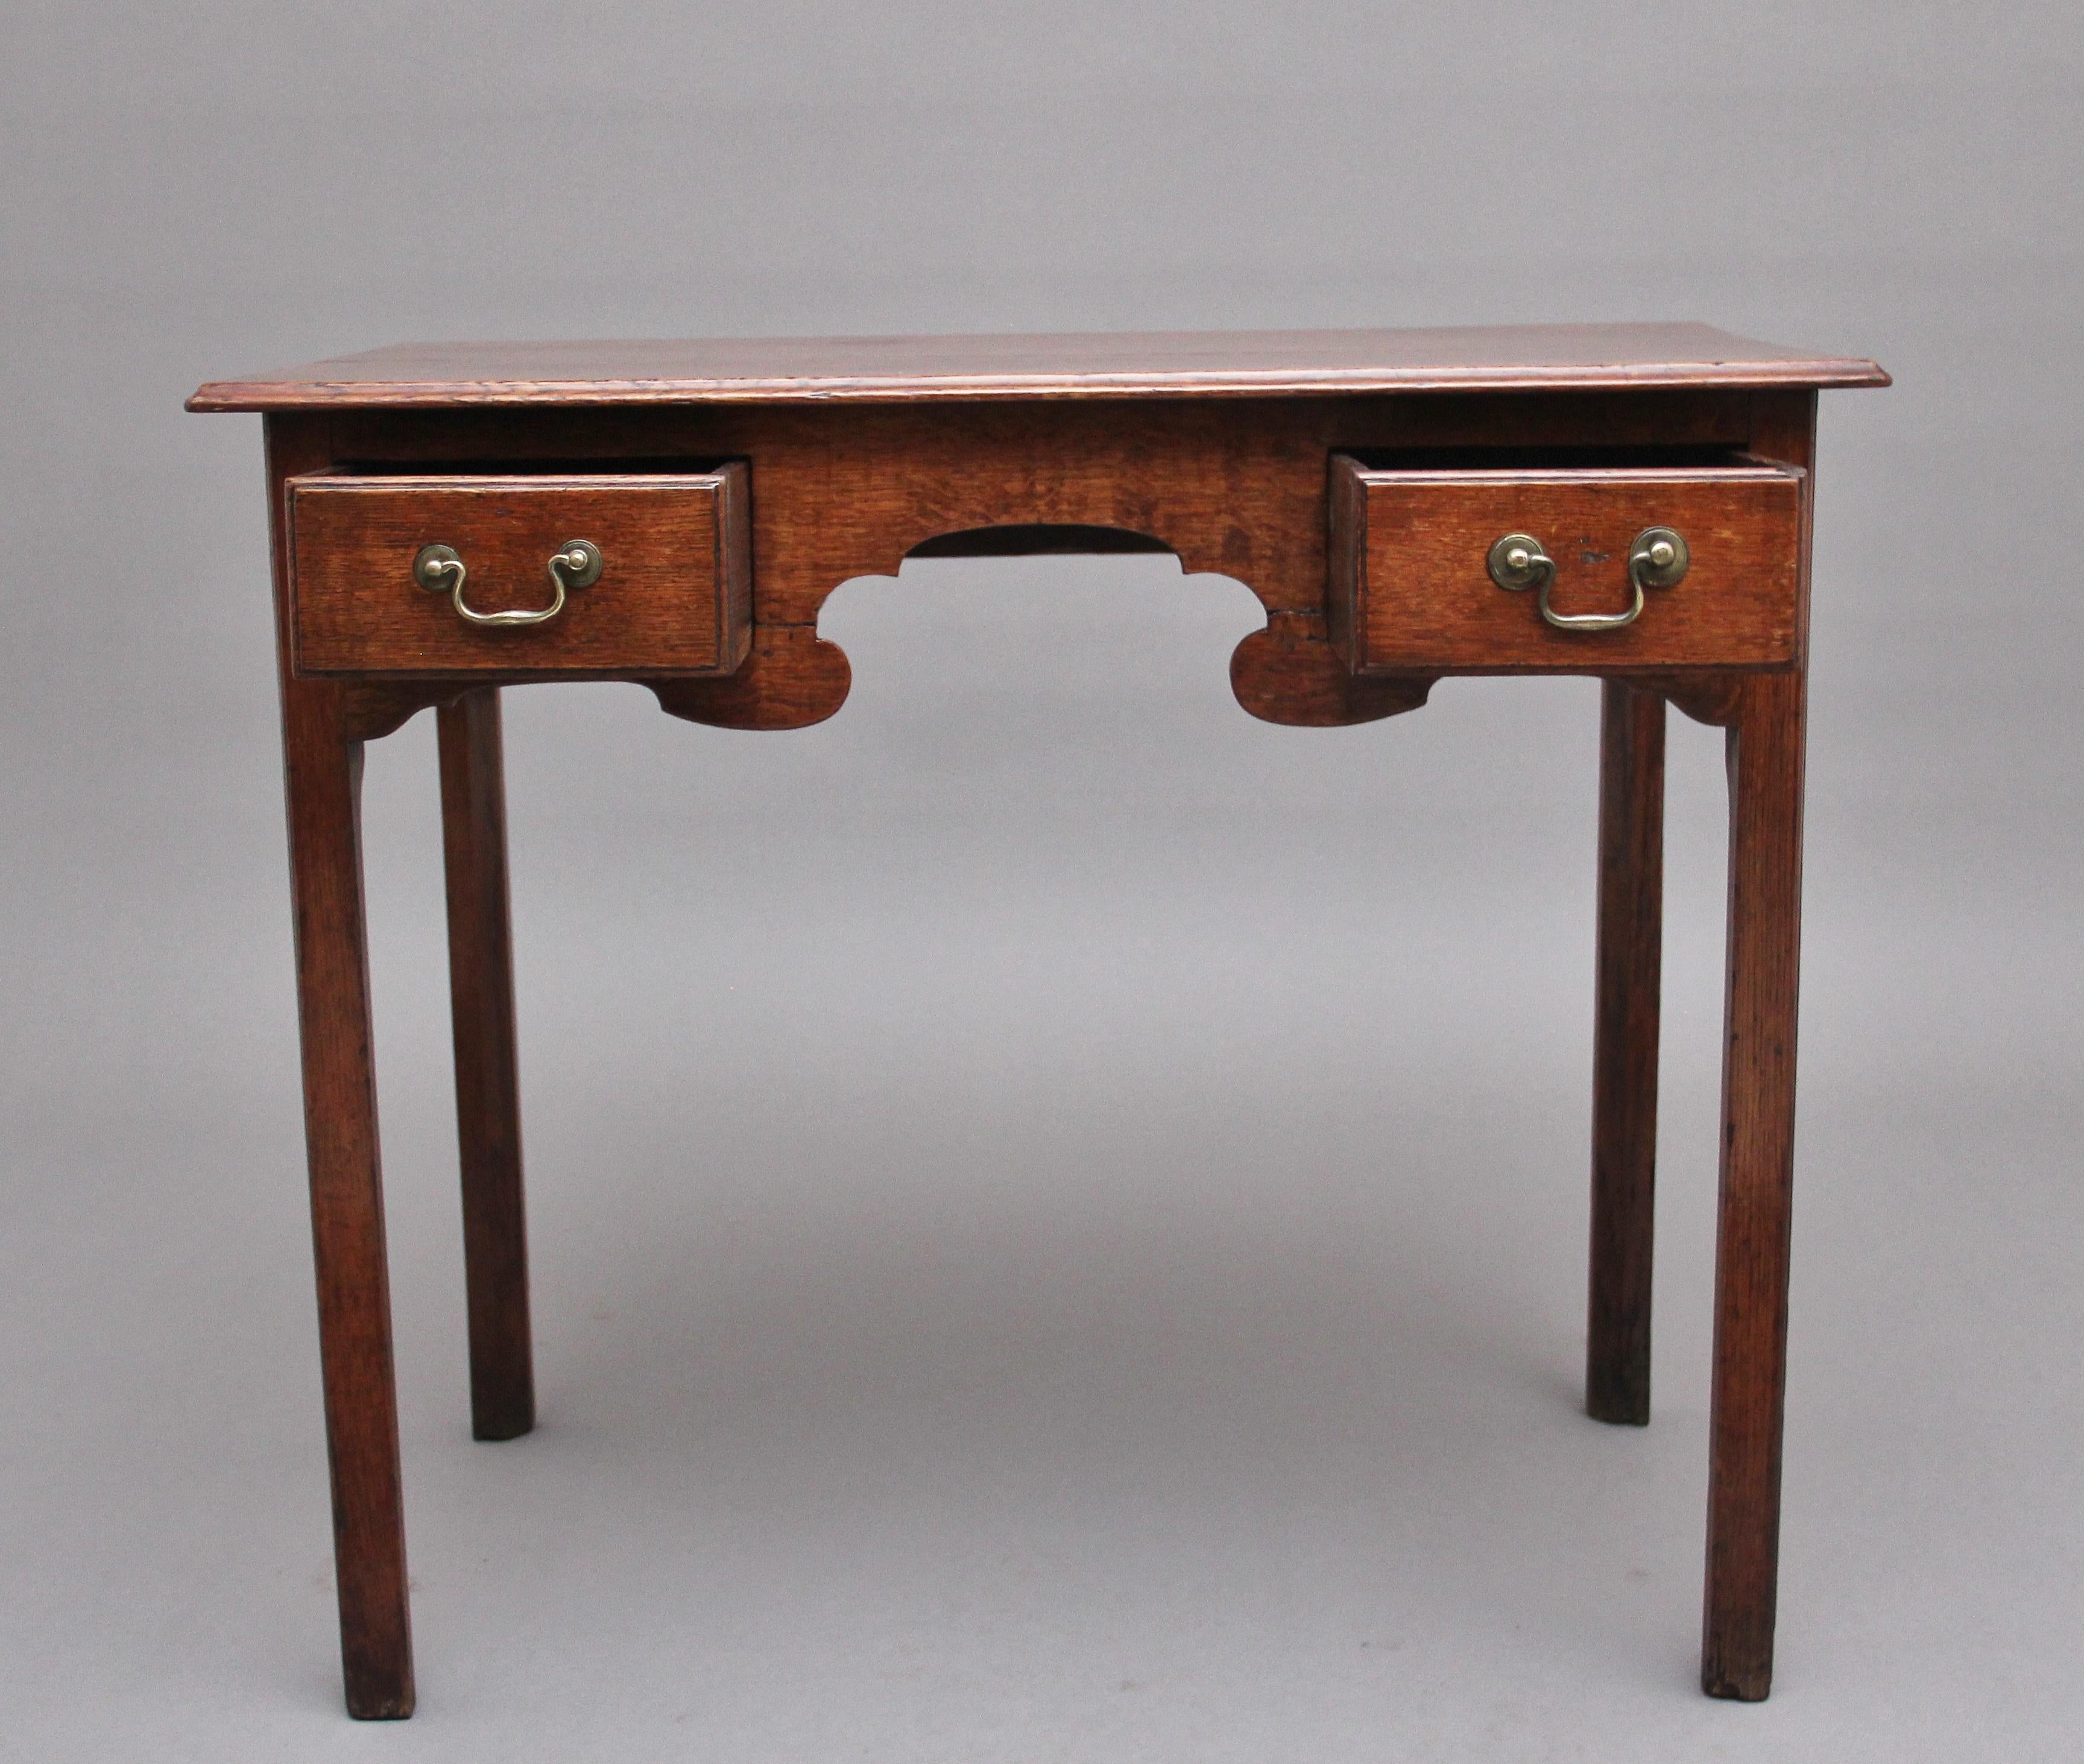 Early 19th century oak lowboy / side table, having a moulded edge top above two oak lined drawer with original brass swan neck handles, having a decorative shaped freeze at the front, standing on square legs. Circa 1800.